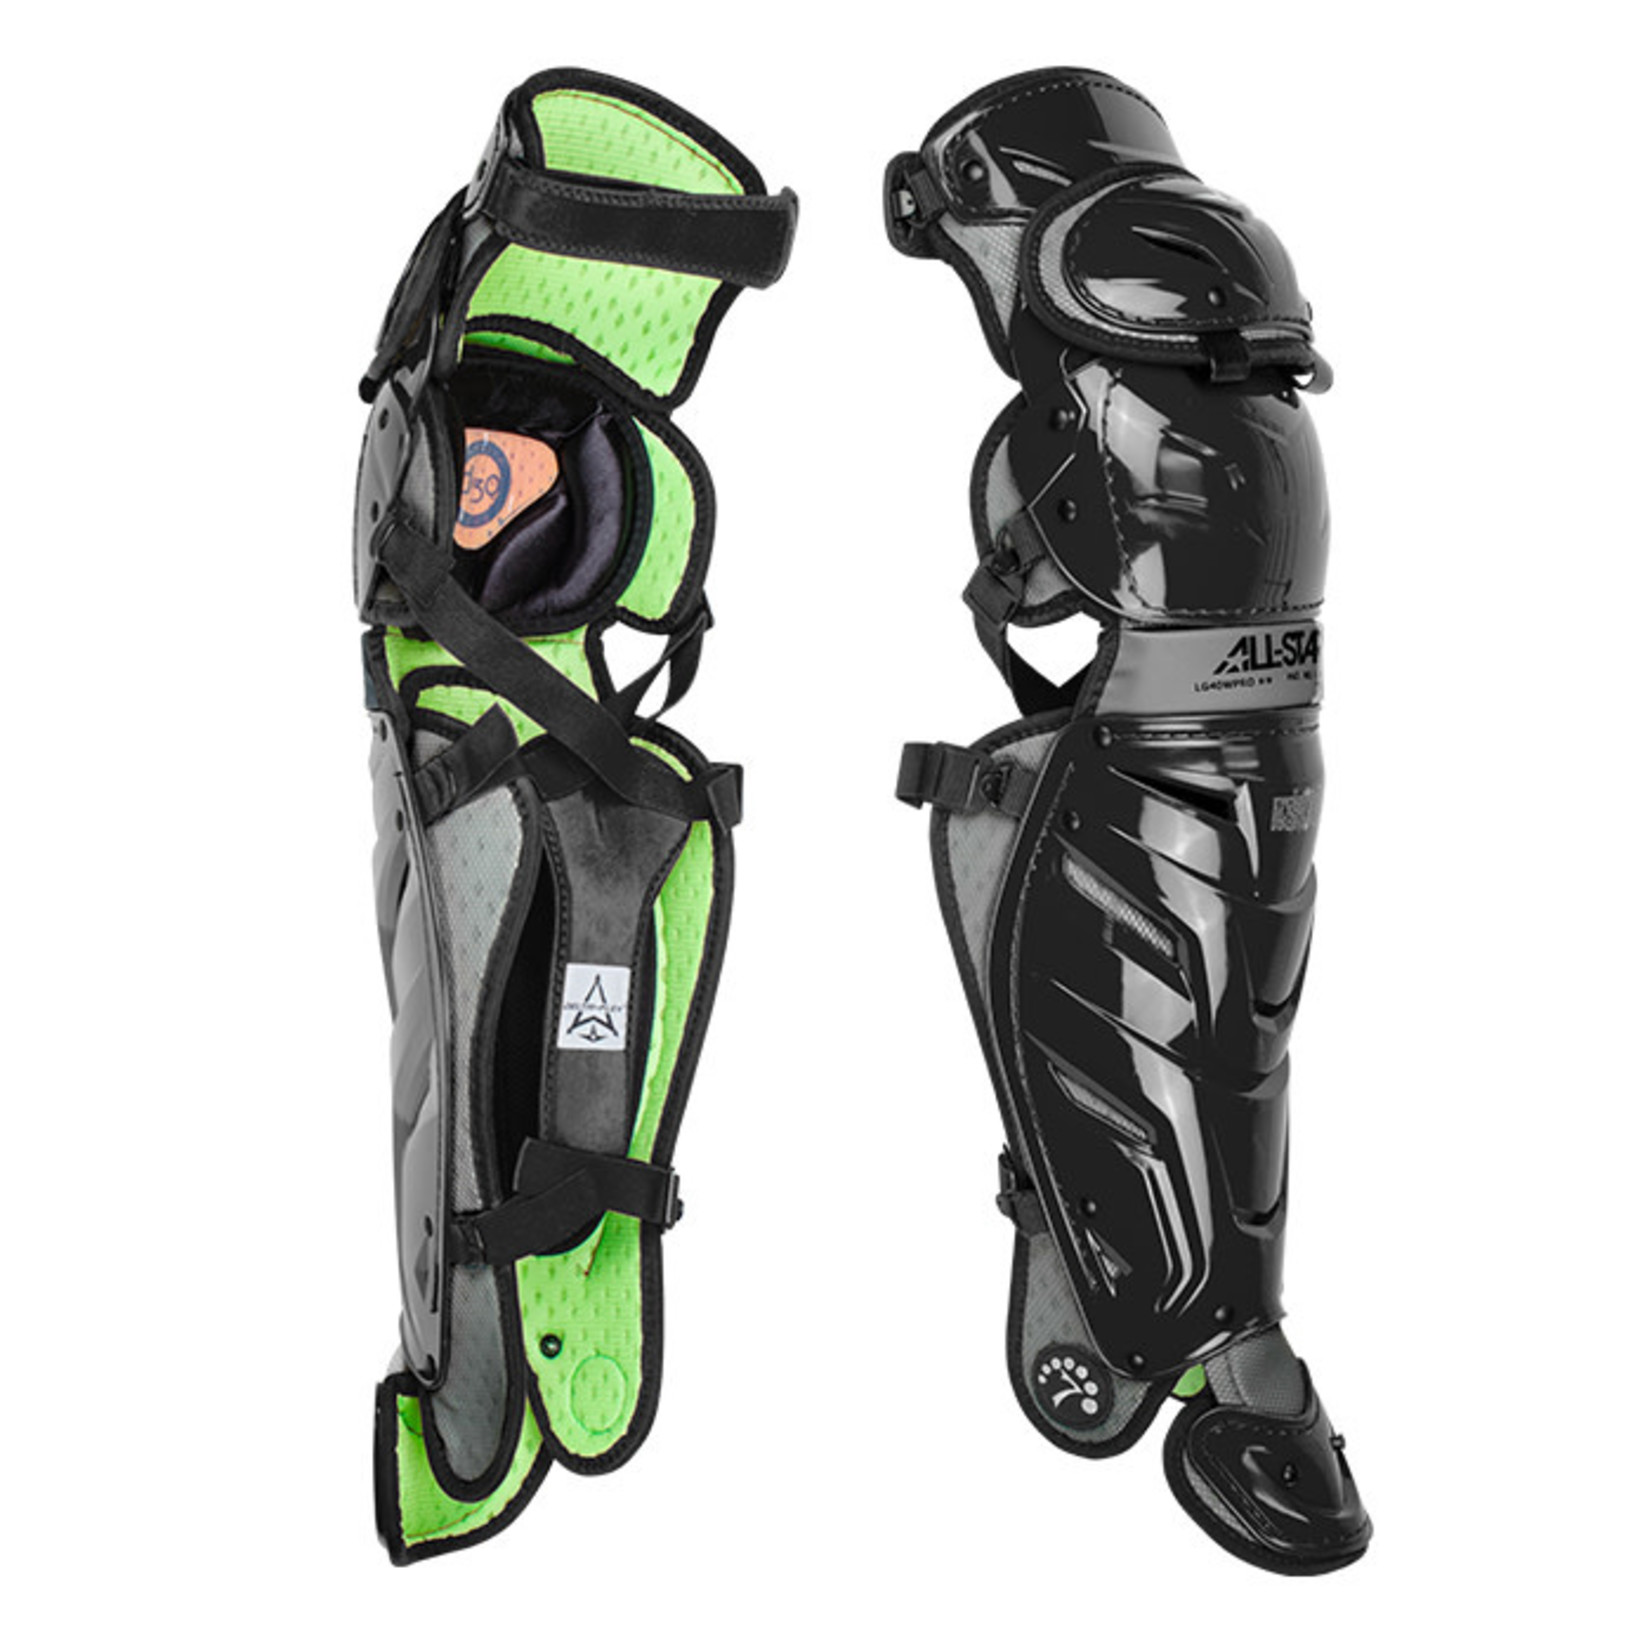 All-Star All Star Youth System 7 Axis Leg Guards